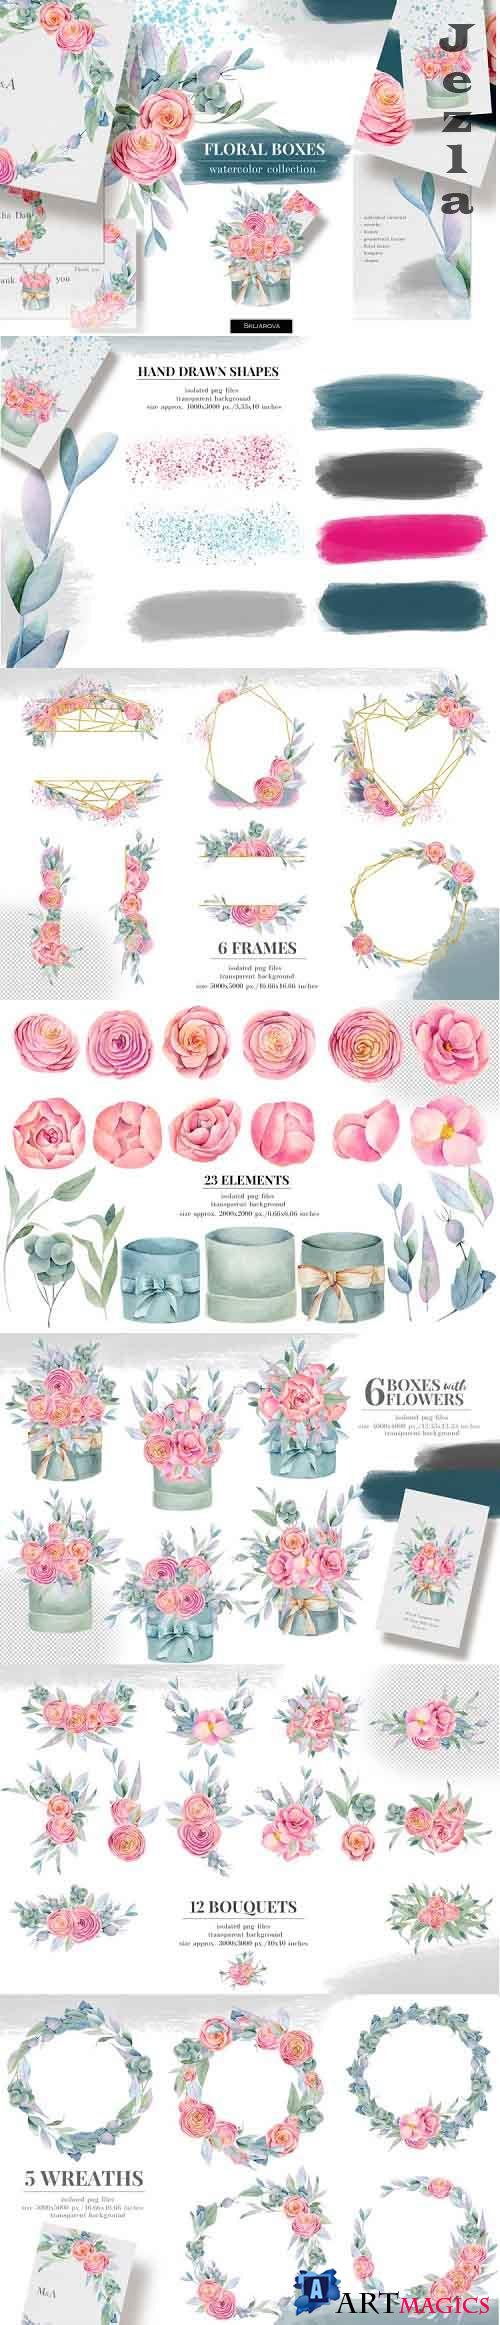 Floral boxes. Watercolor collection - 429165